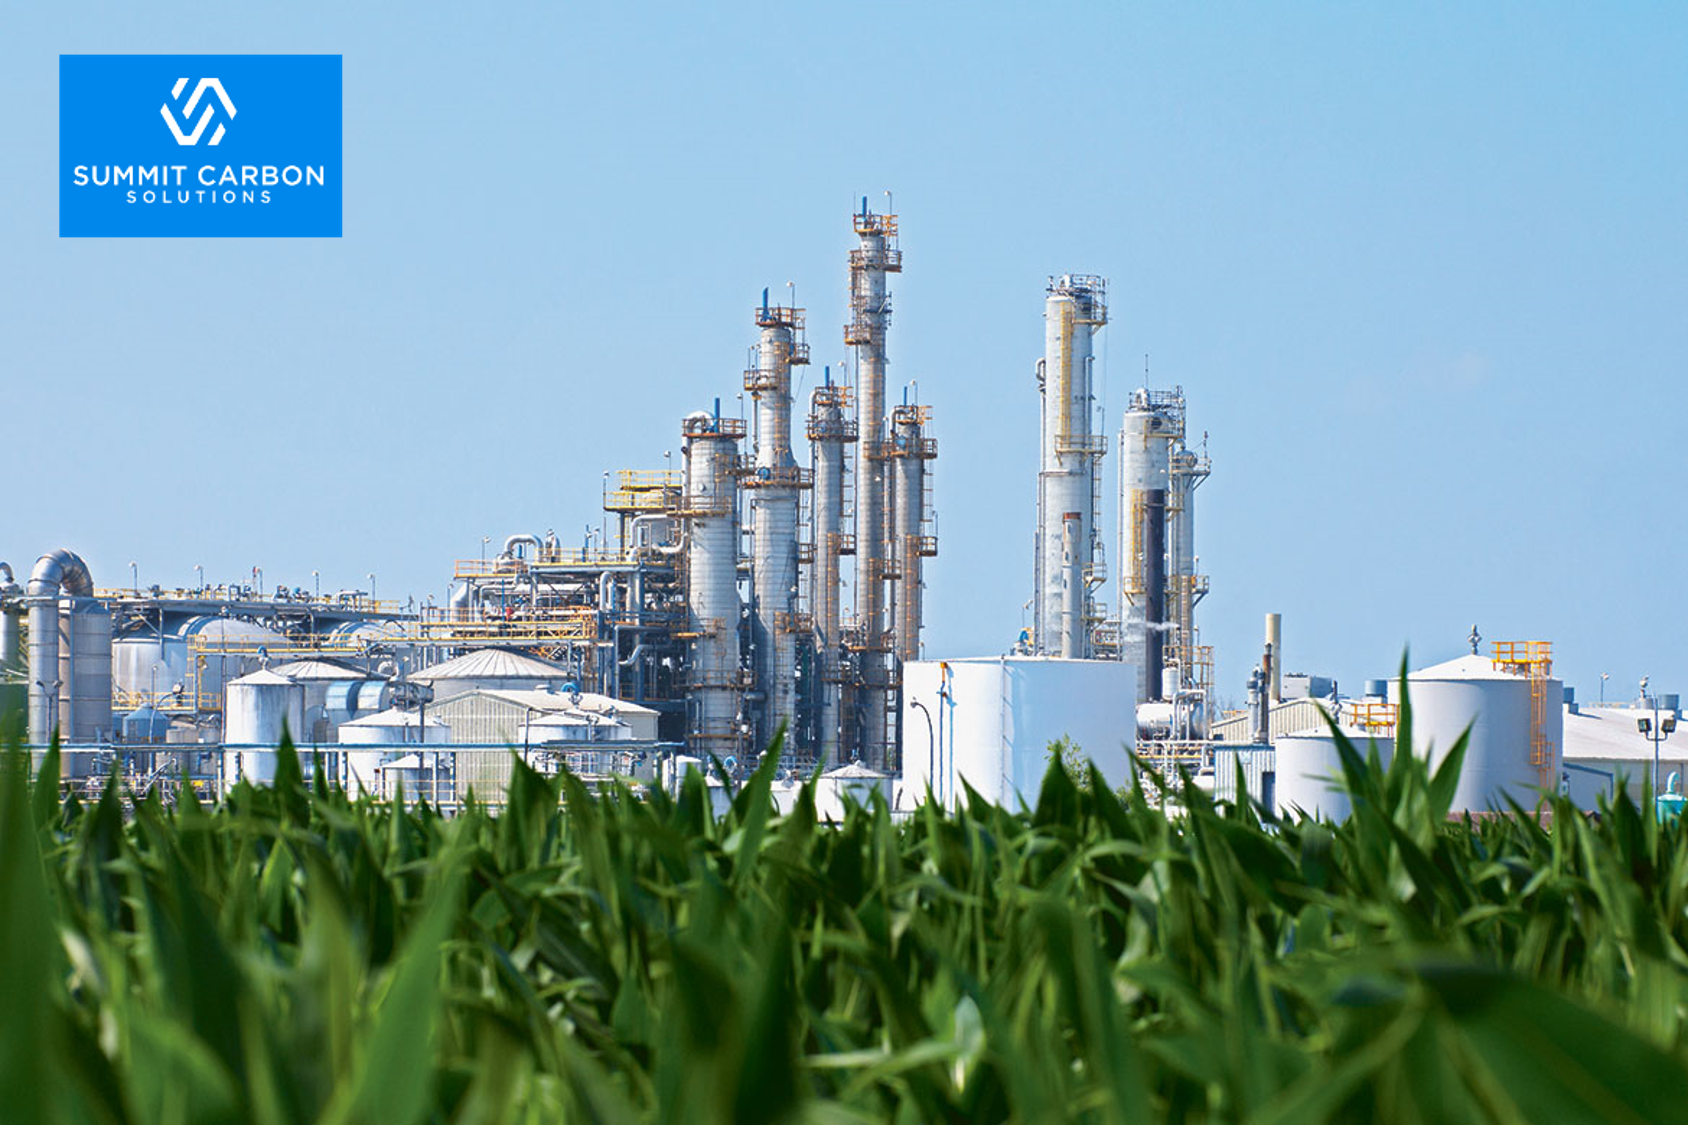 12 more biorefineries join Summit Carbon Solutions, bringing the total to  30 facilities in the US - Biofuels Central